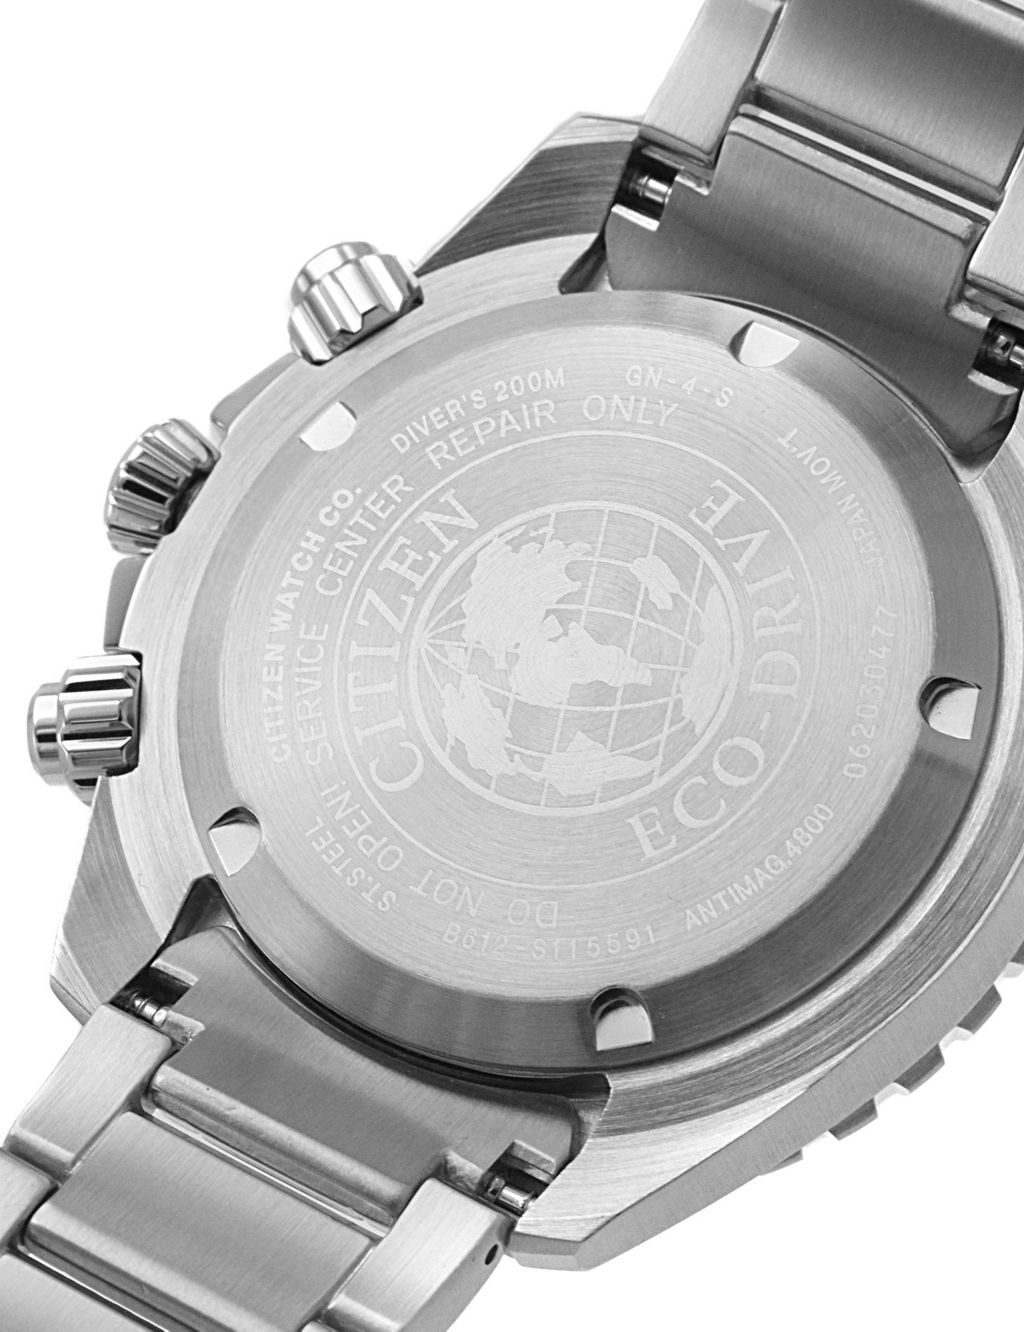 Citizen Promaster Diver's Stainless Steel Chronograph Watch image 3